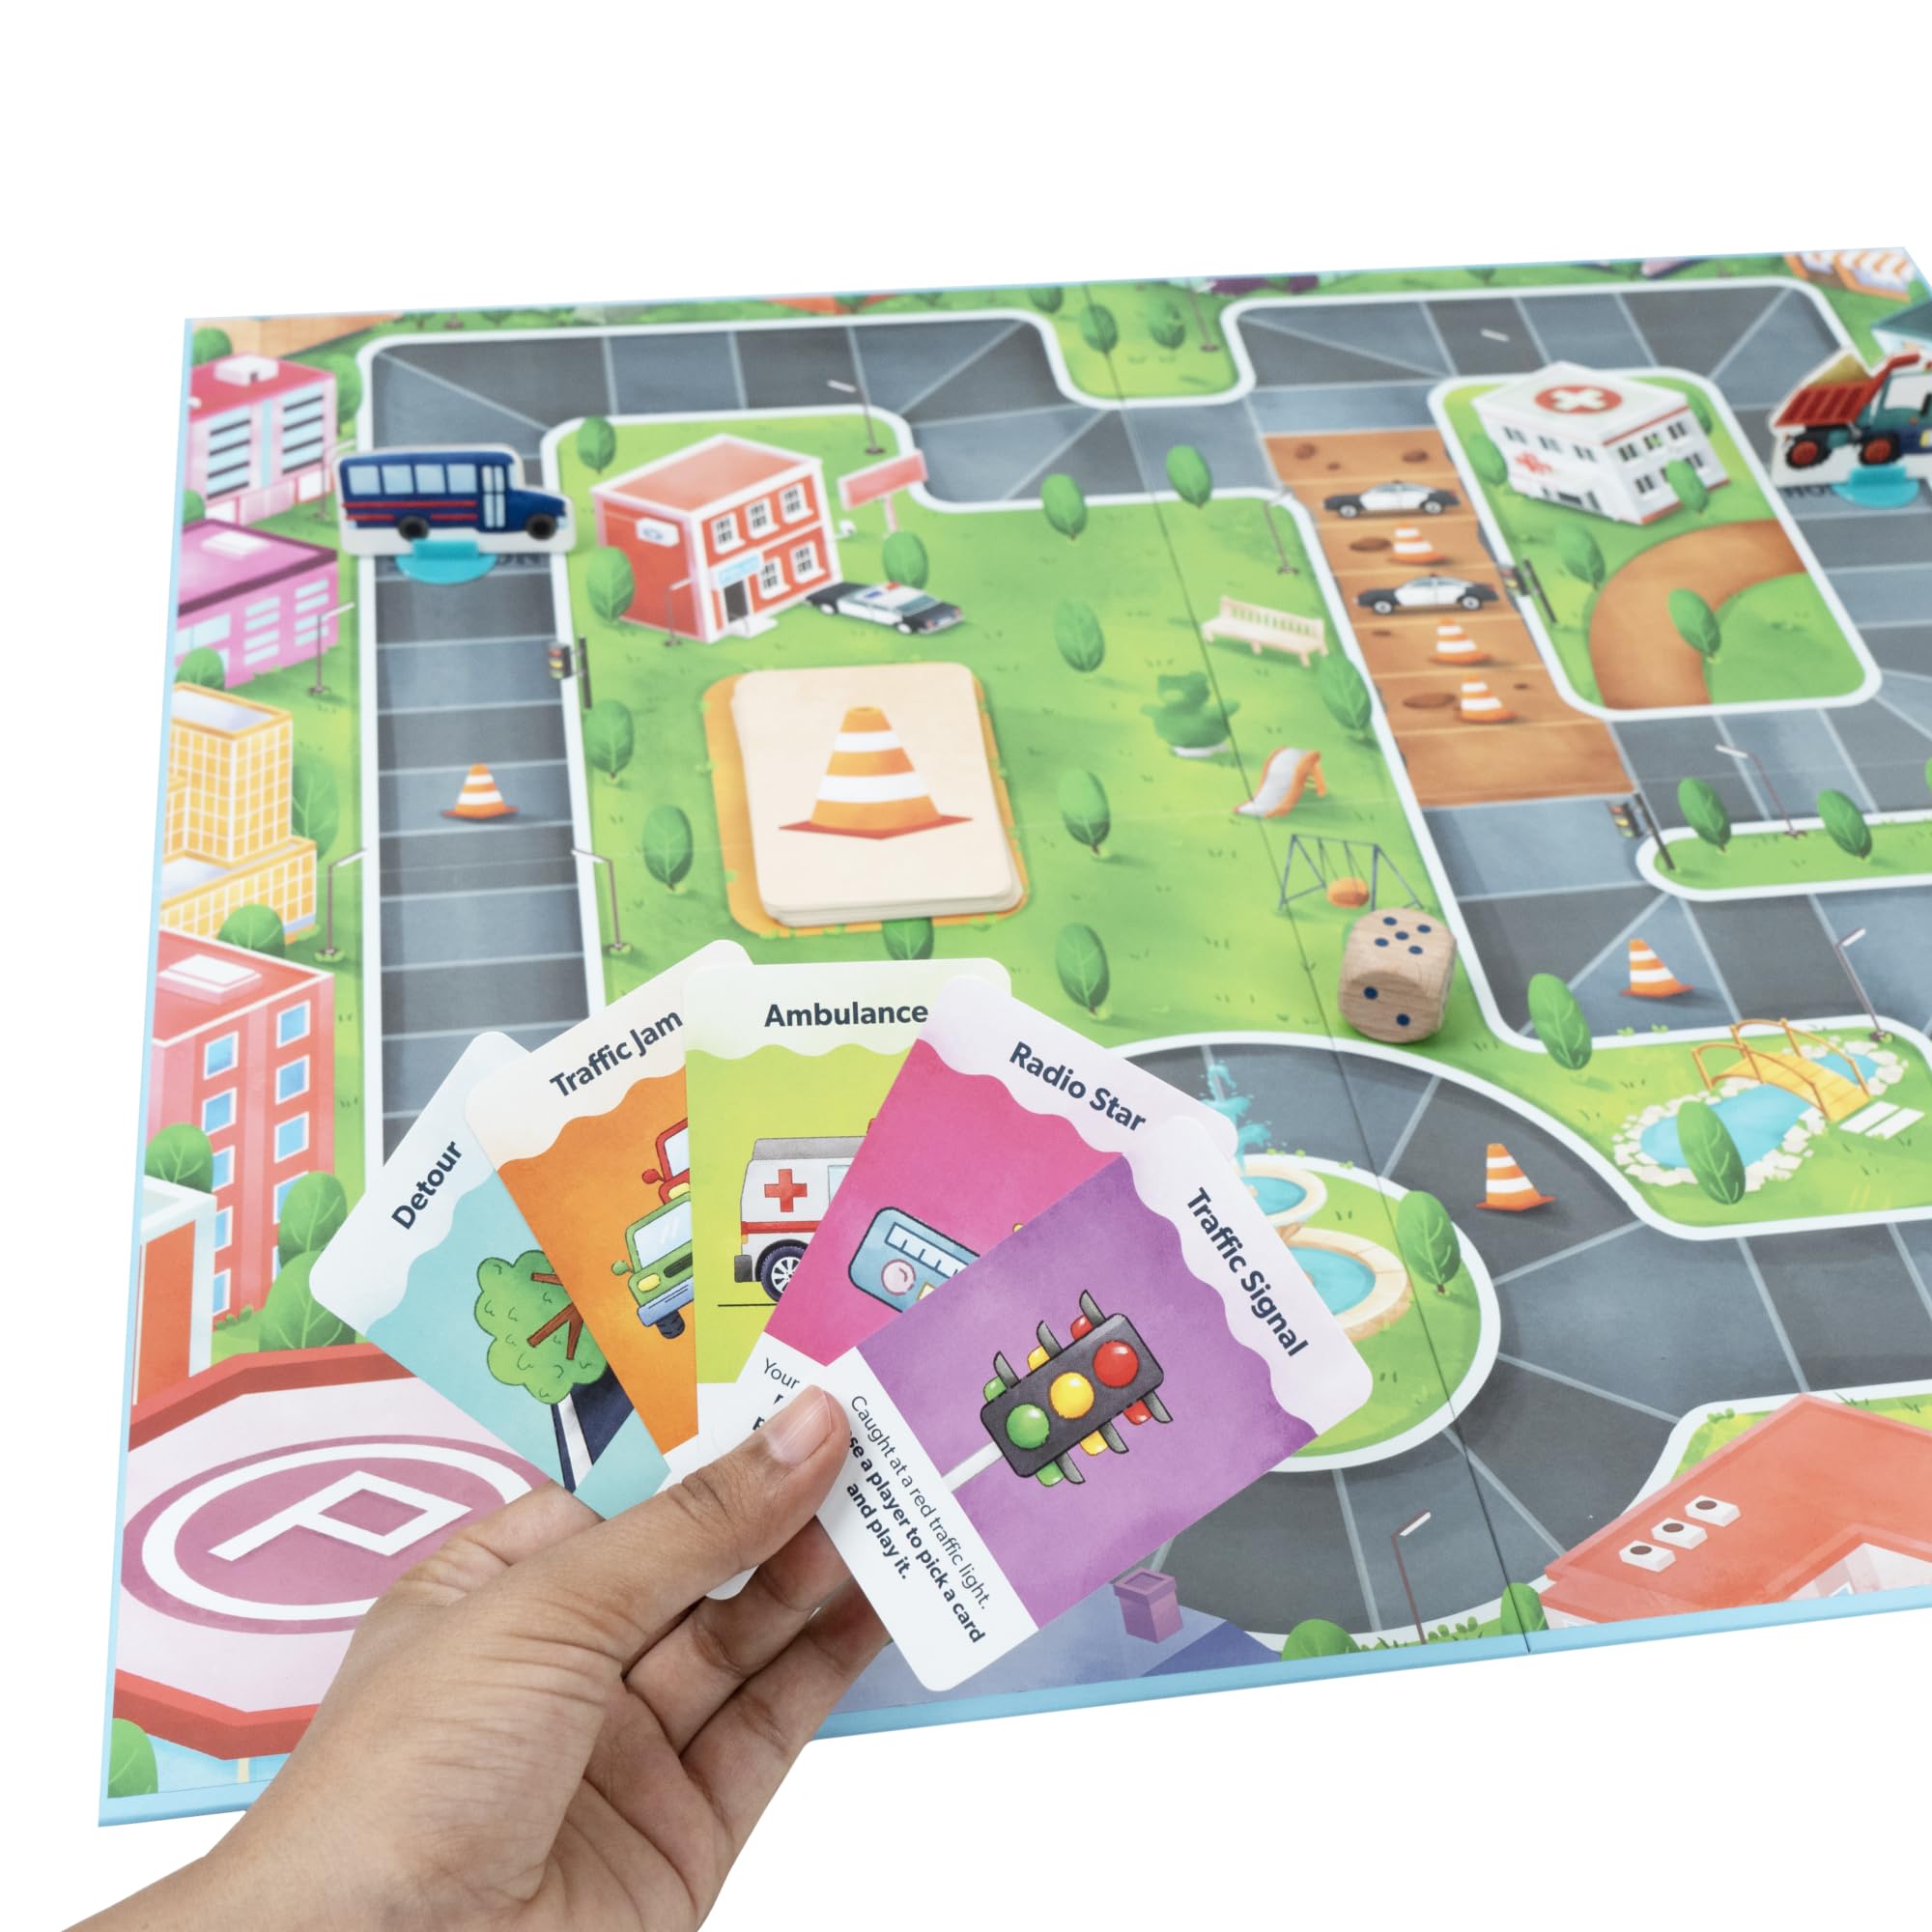 Strategic Board Games & Puzzles for Kids | Chaos Commute - LoveDabble | Board Games for Kids & Adults | Board Games for Family Night| 2+Players | Gifts for Boys and Girls | for Ages 6+ Years